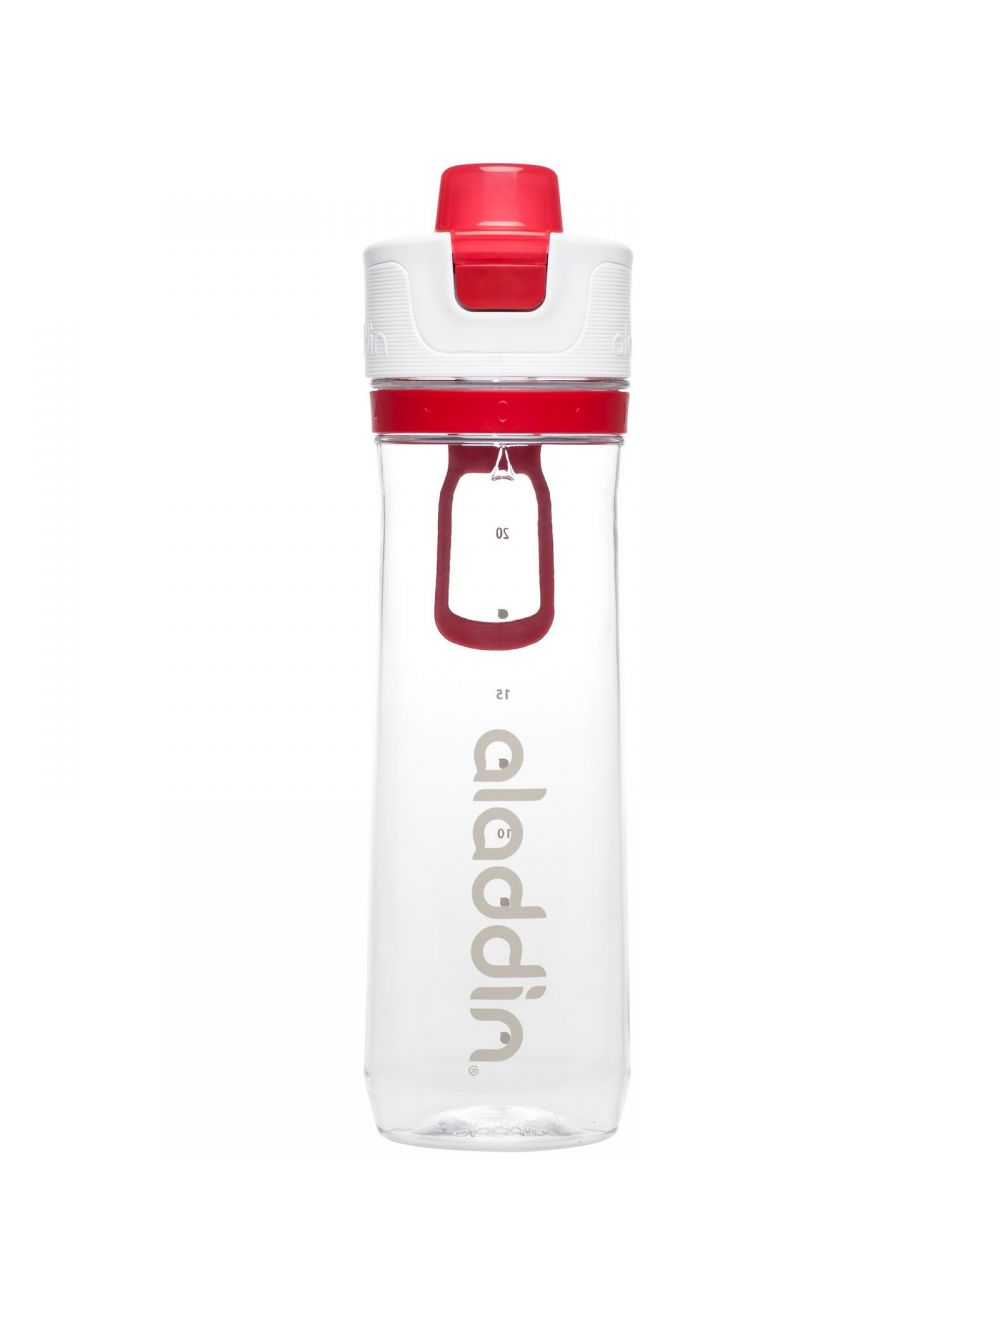 Aladdin Active Hydration Tracker Water Bottle 0.8L Red-10-02671-003